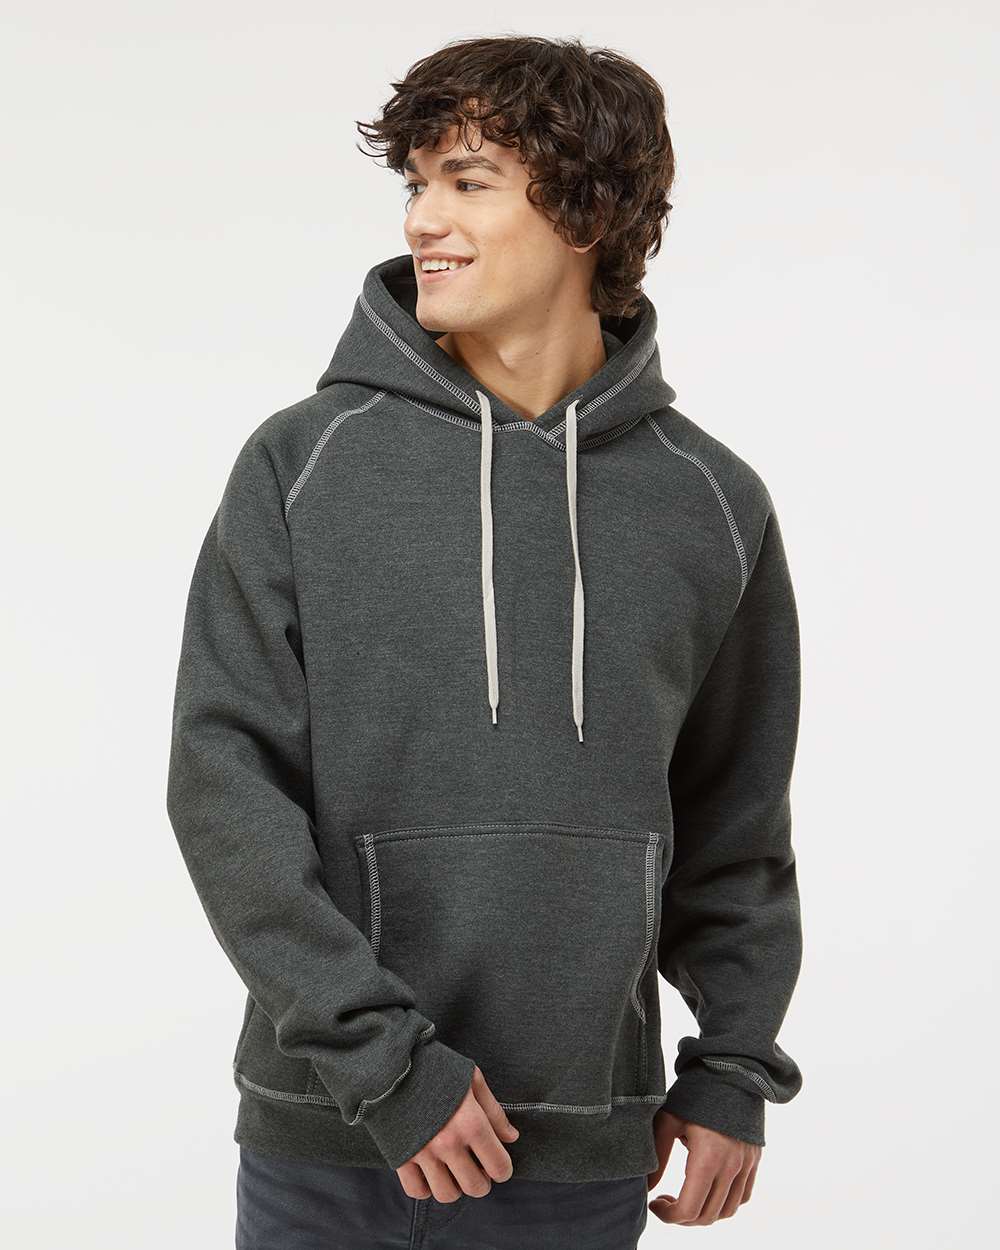 King Fashion Extra Heavy Hooded Pullover KP8011 #colormdl_Charcoal Mix